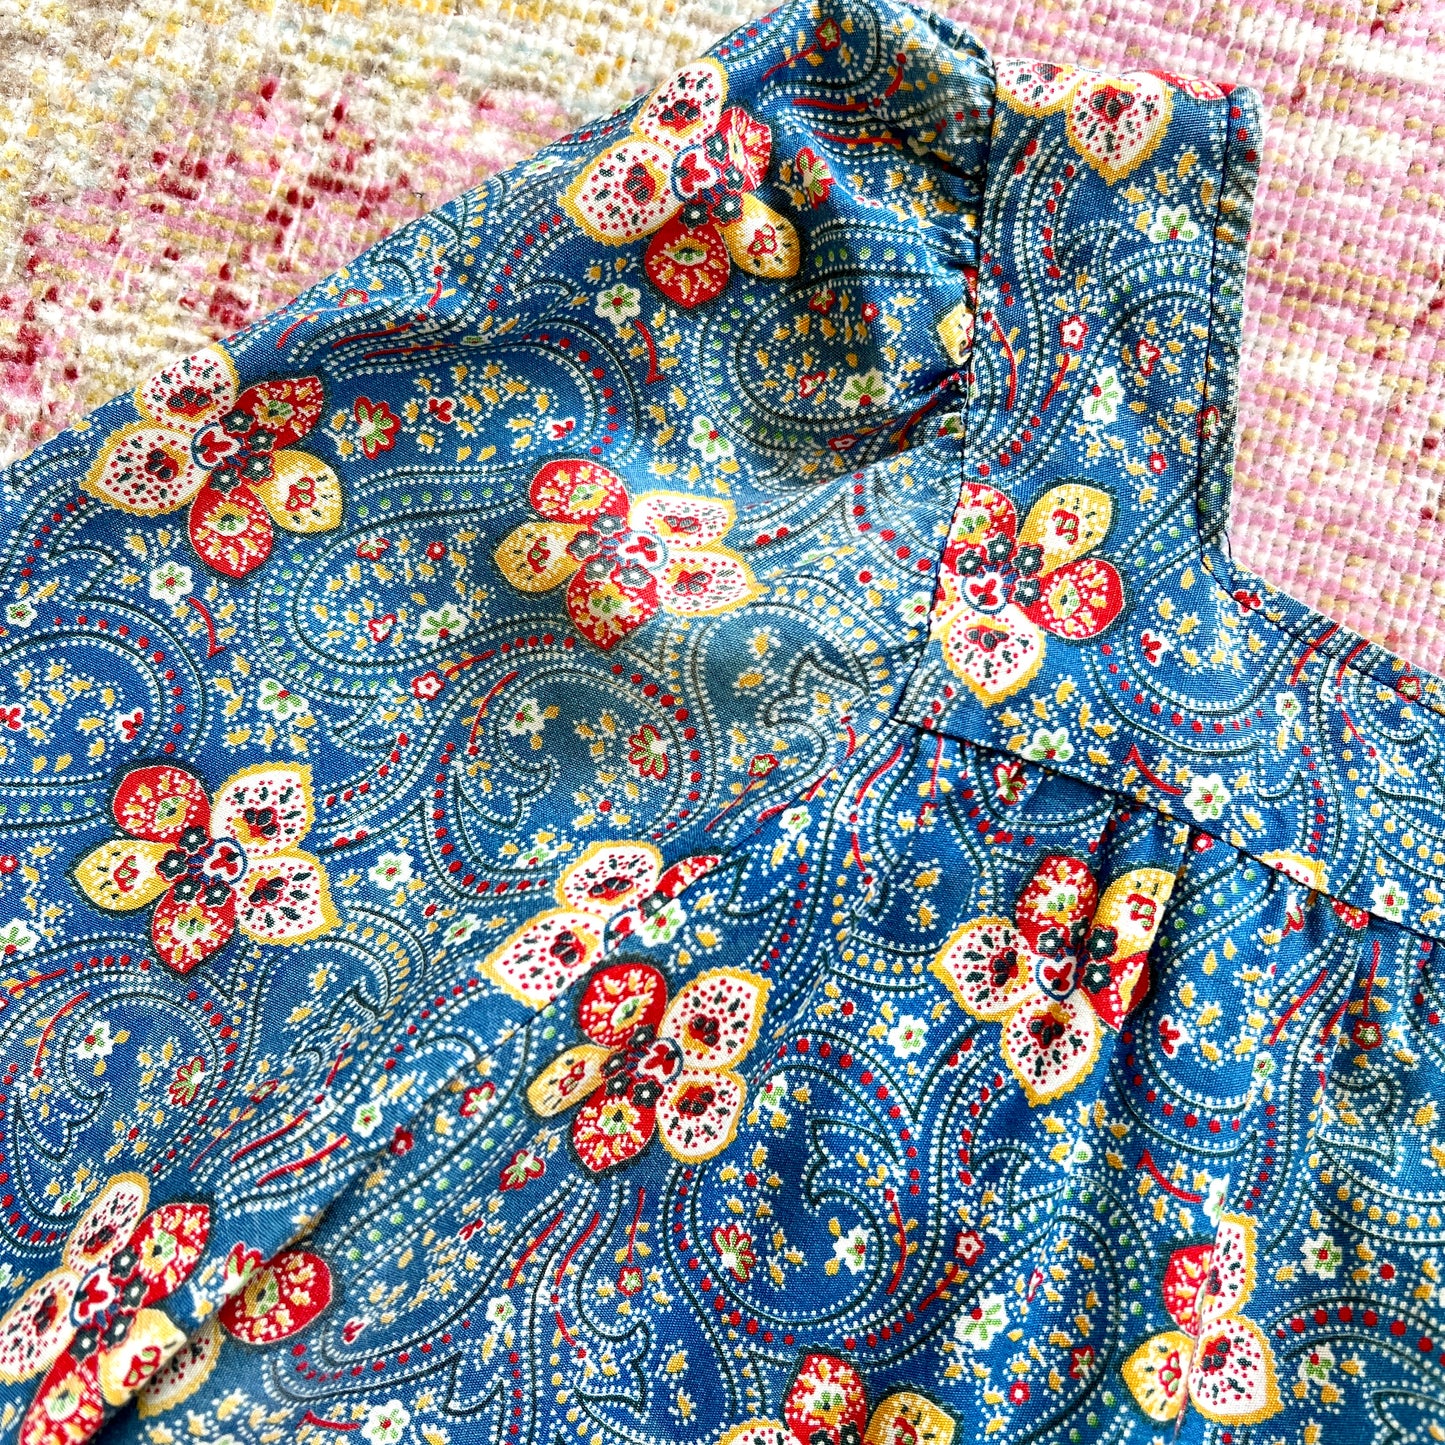 [AS-IS] 1970s Floral Blouse | large/x-large